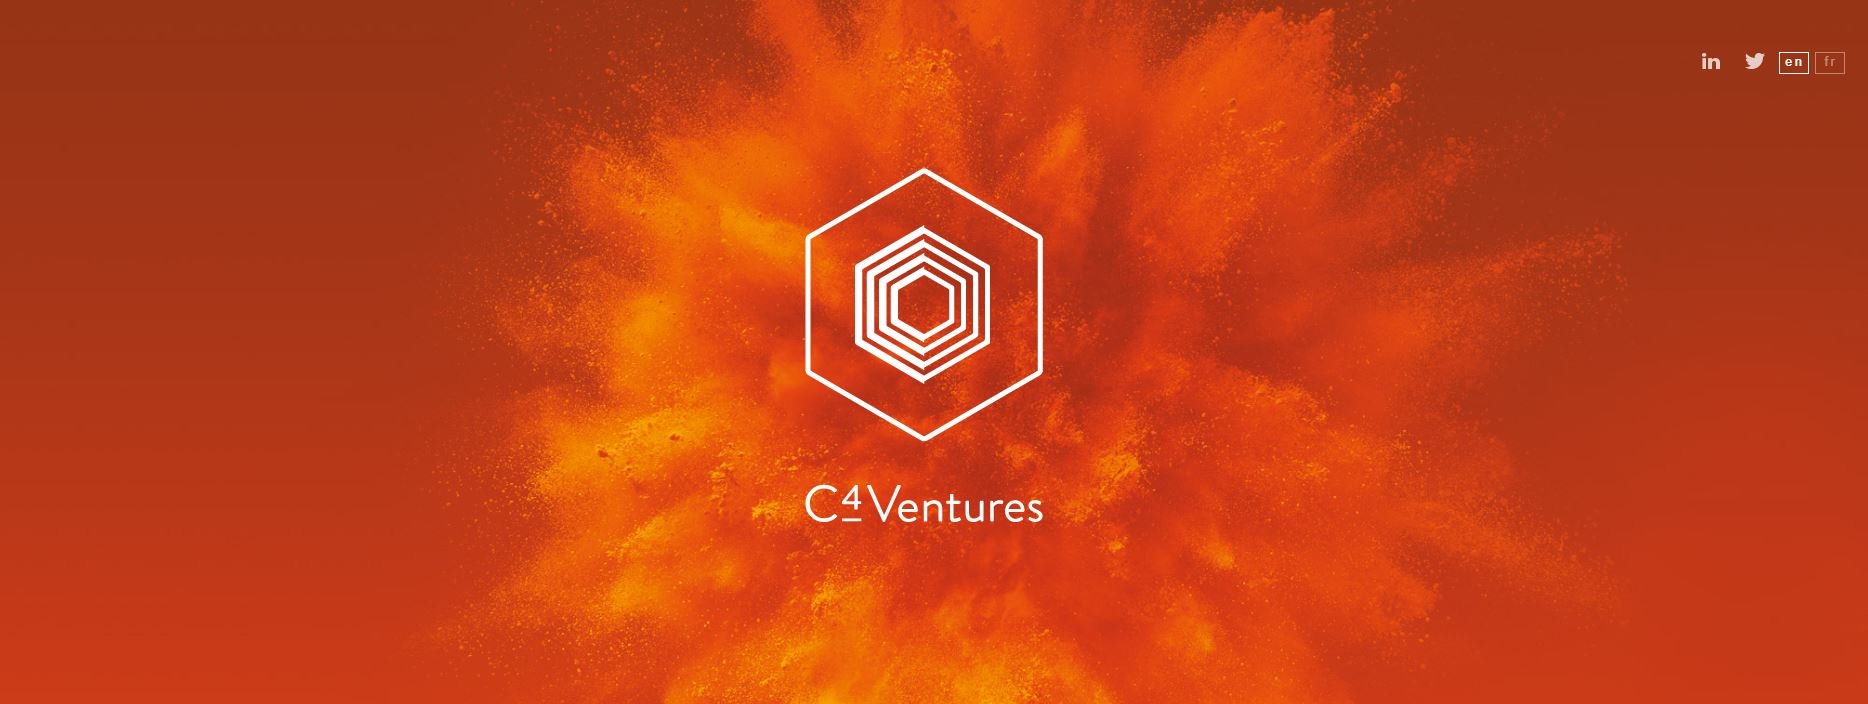 C4 Ventures announces €80 million fund, led by former EMEA head of Apple Pascal Cagni